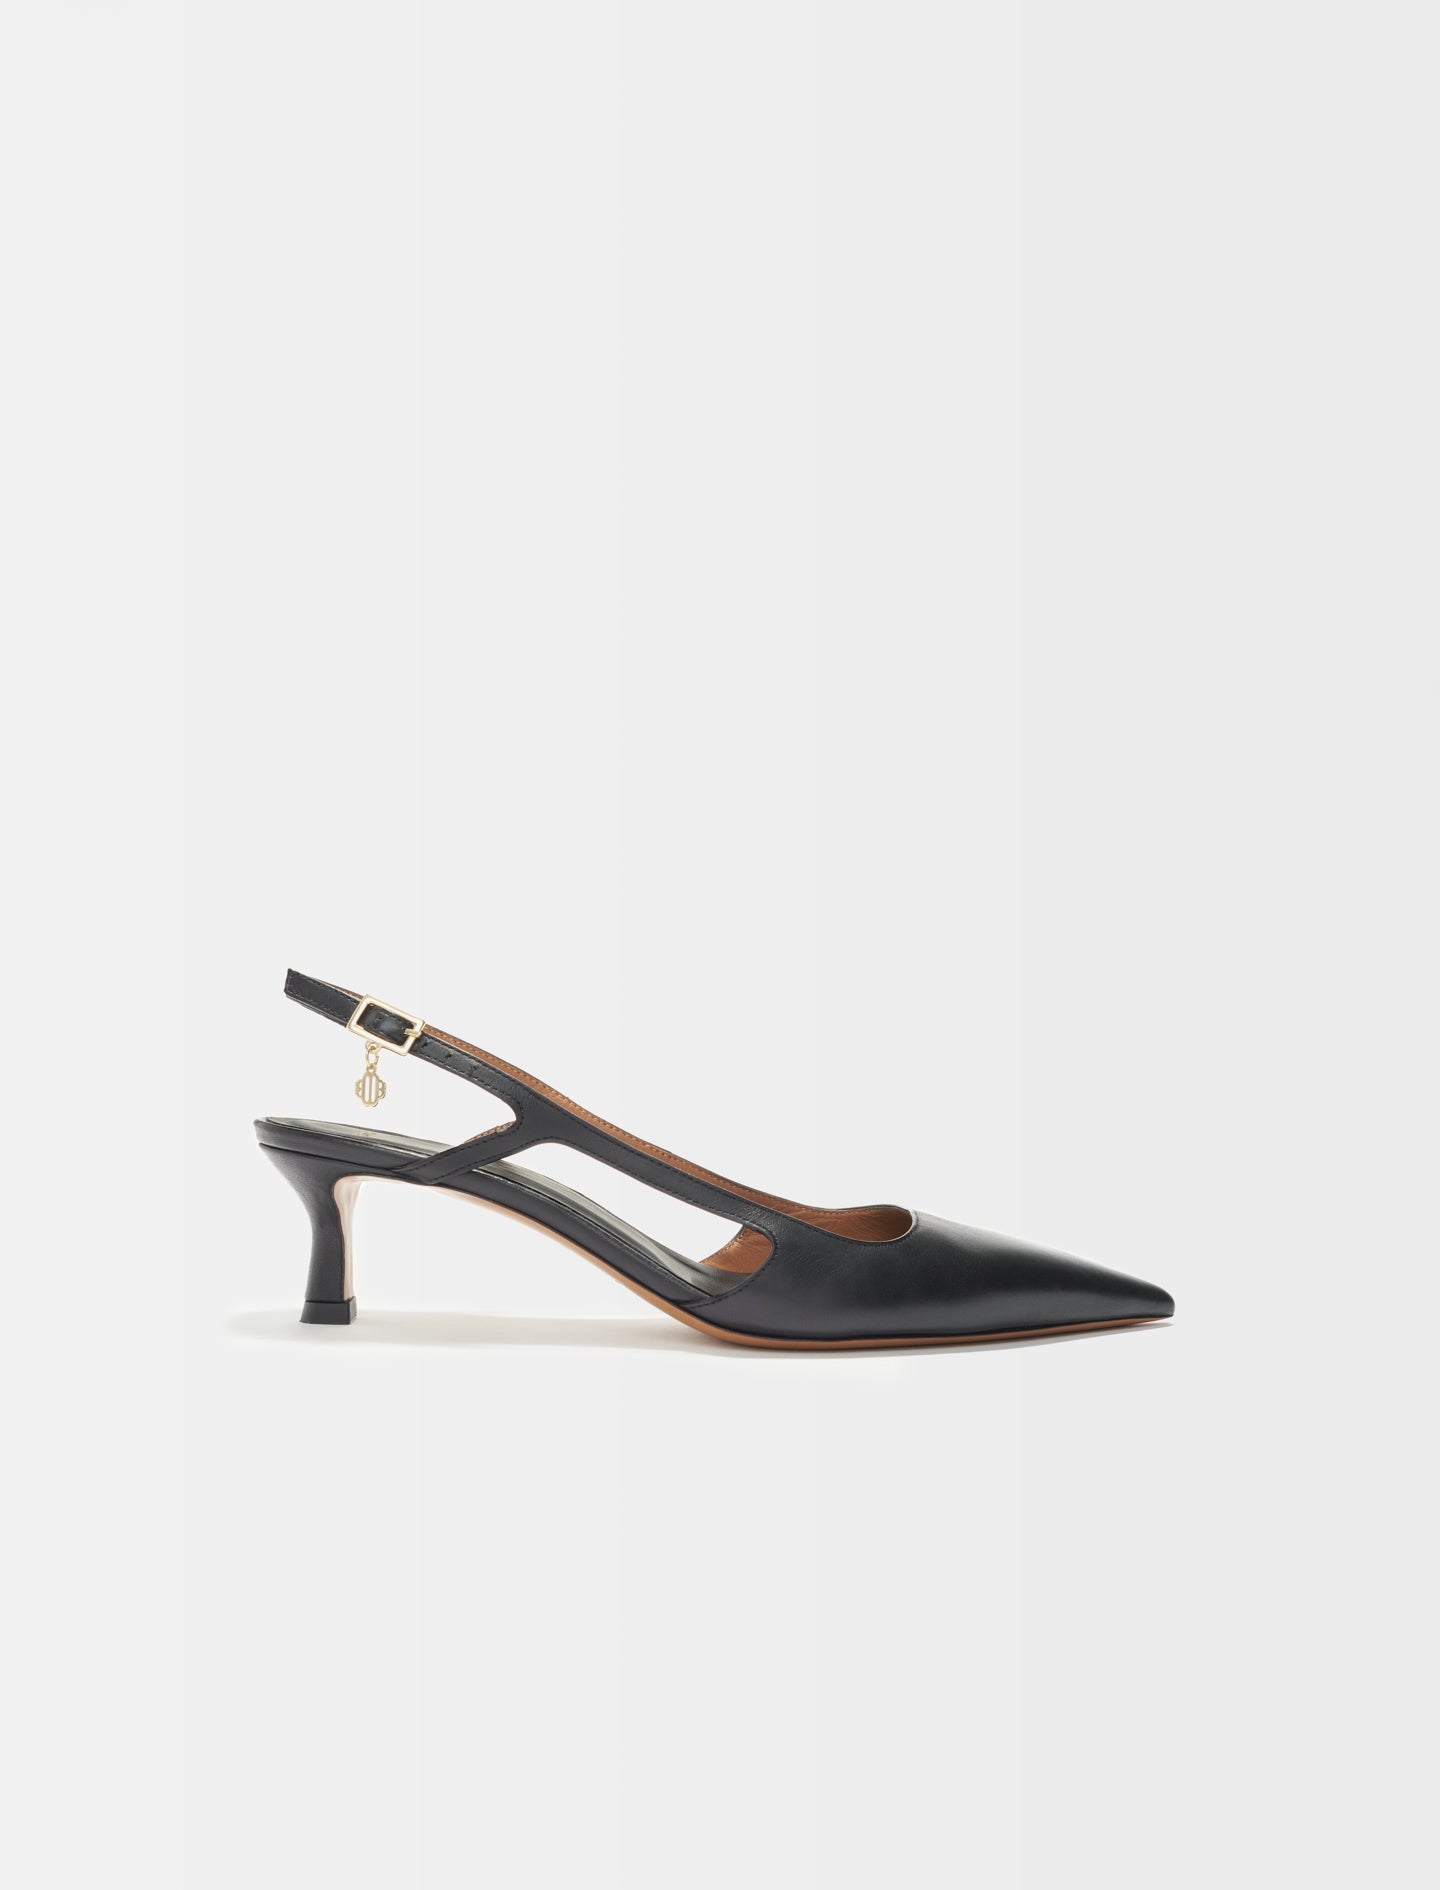 Black featured POINTED-TOE PUMPS WITH STRAPS